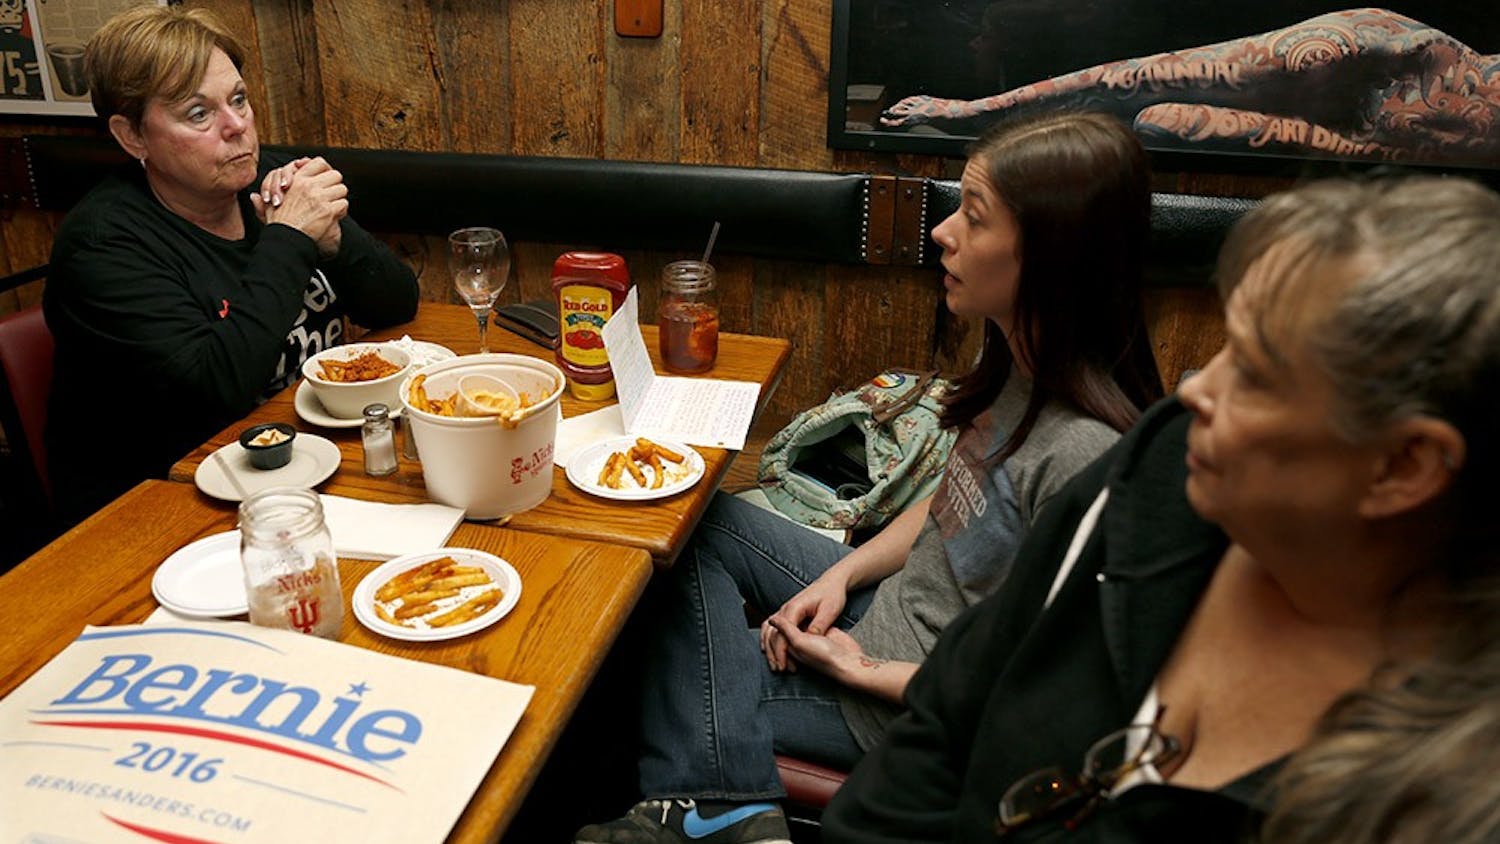 Ruth Simcox, left, Jessica Martlage, and Shellie Martlage talk before the CNN Democratic debate begins Wednesday at the Nick's English Hut. Bloomington Bernie Supporters opened a group meeting to watch the debate and support Bernie Sanders. 